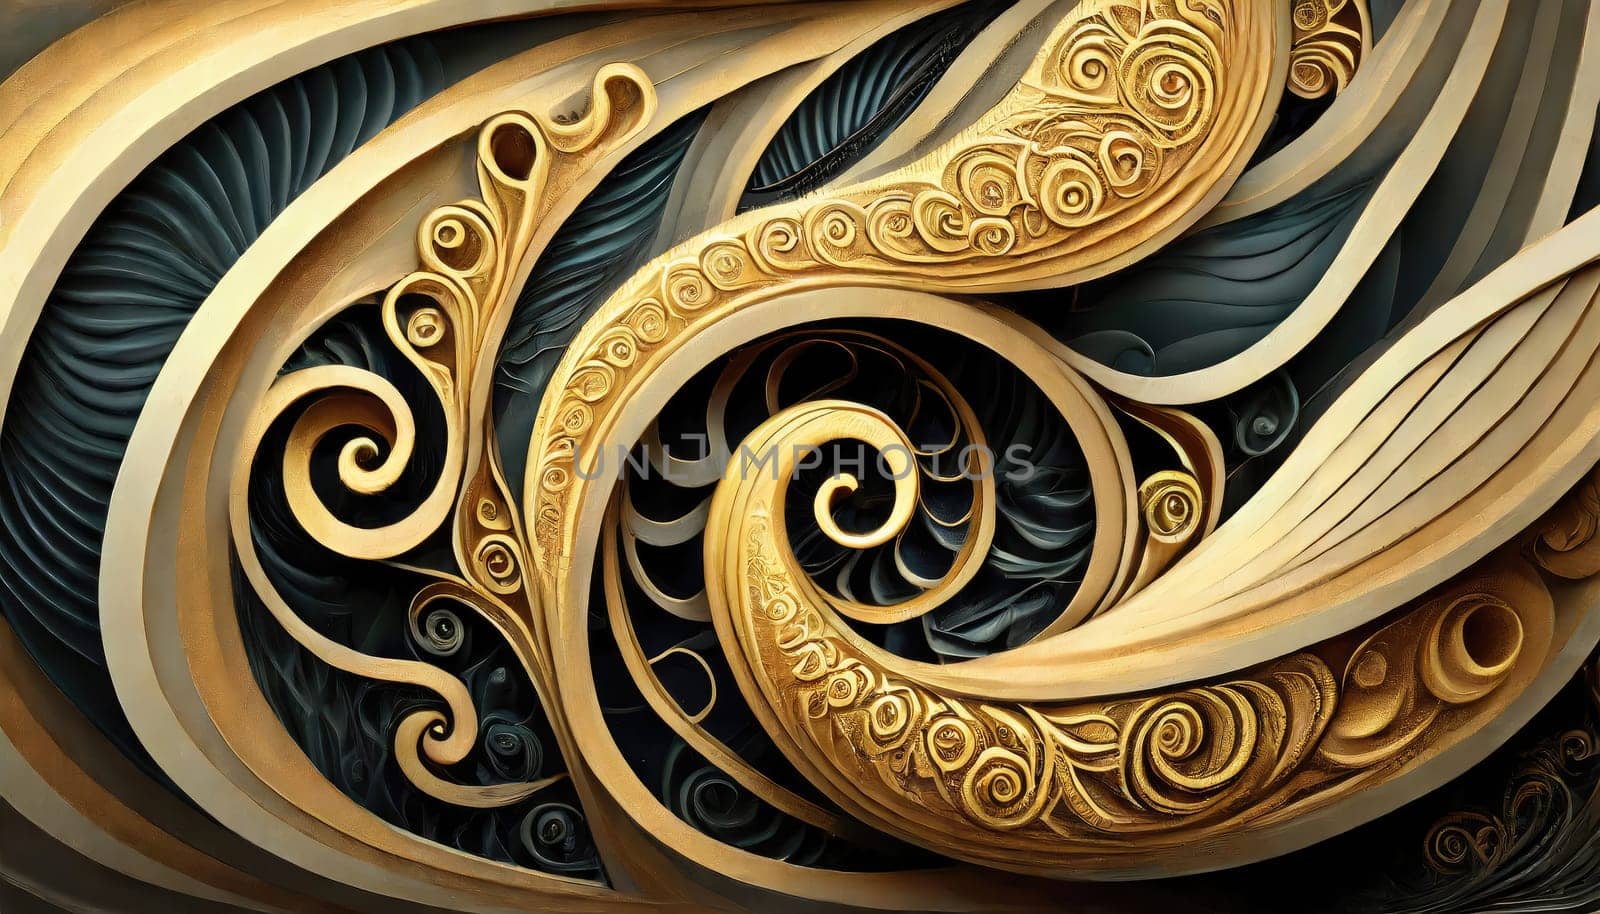 abstract swirling designs, very intricate. by PeaceYAY